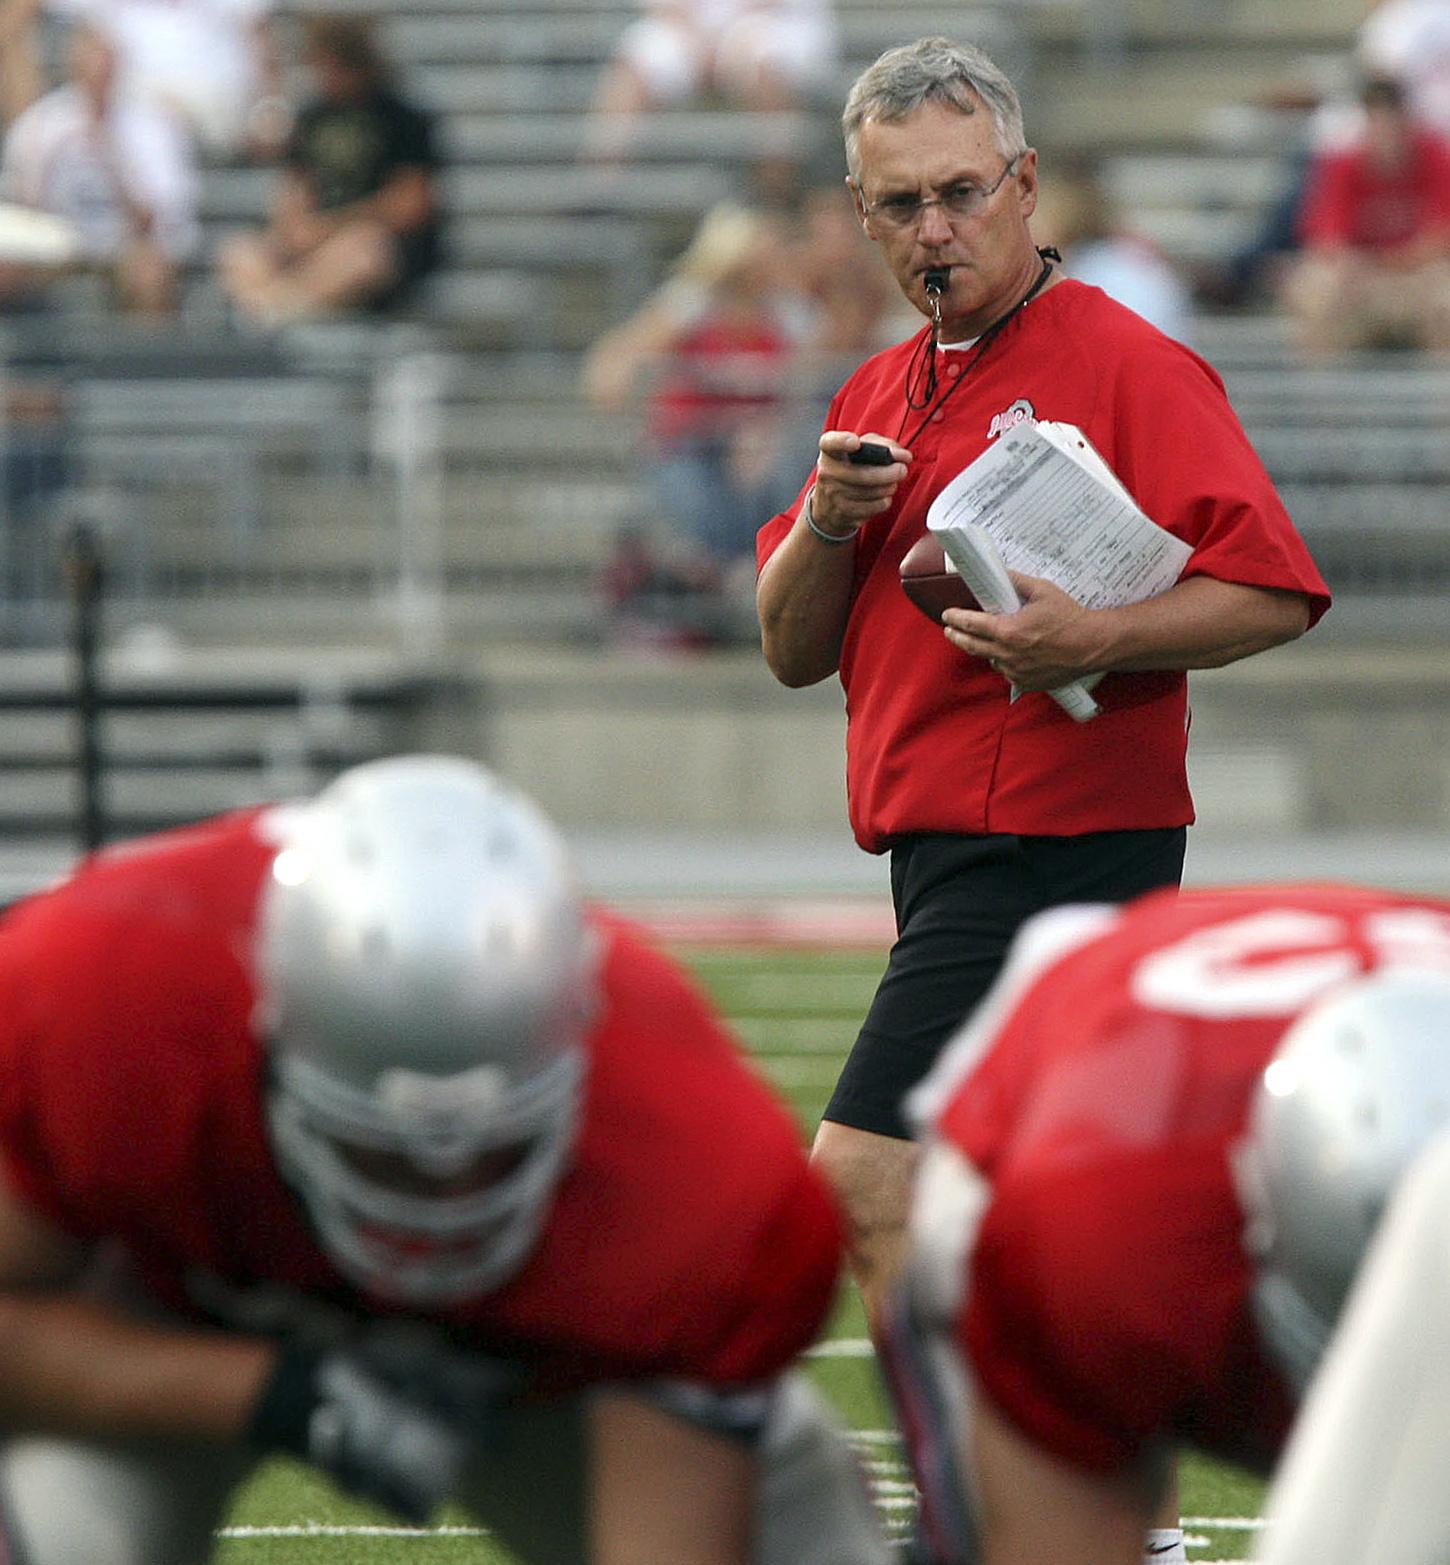 Tressel says he’d have no problem with having a gay football player